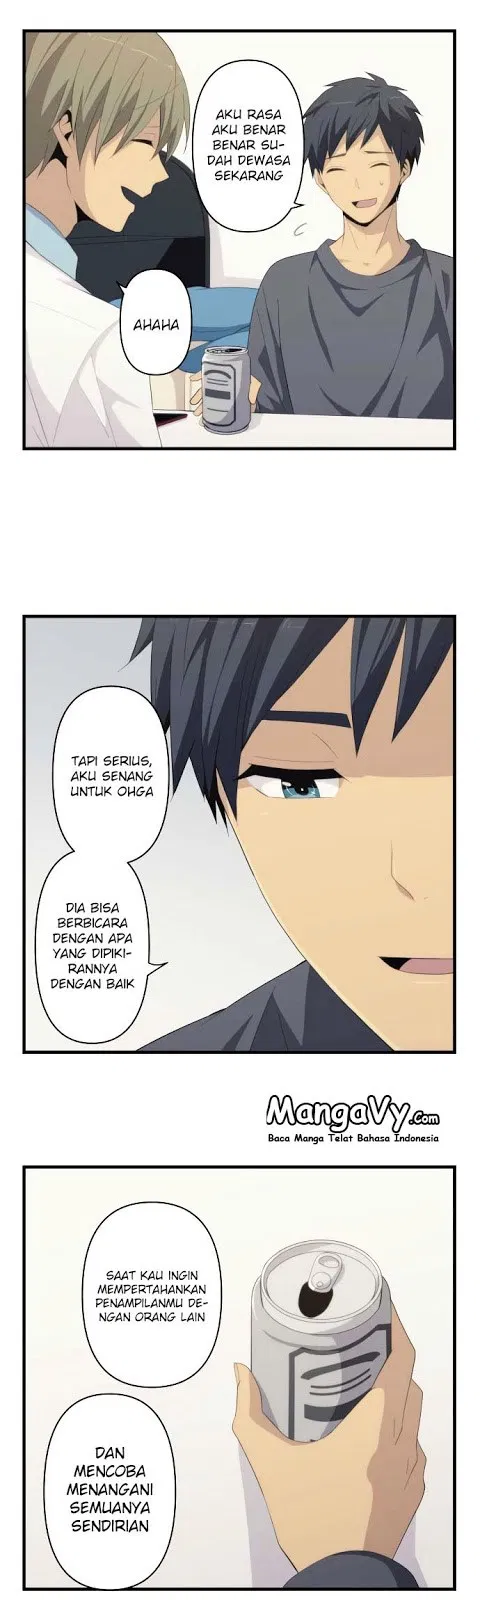 ReLIFE Chapter 179